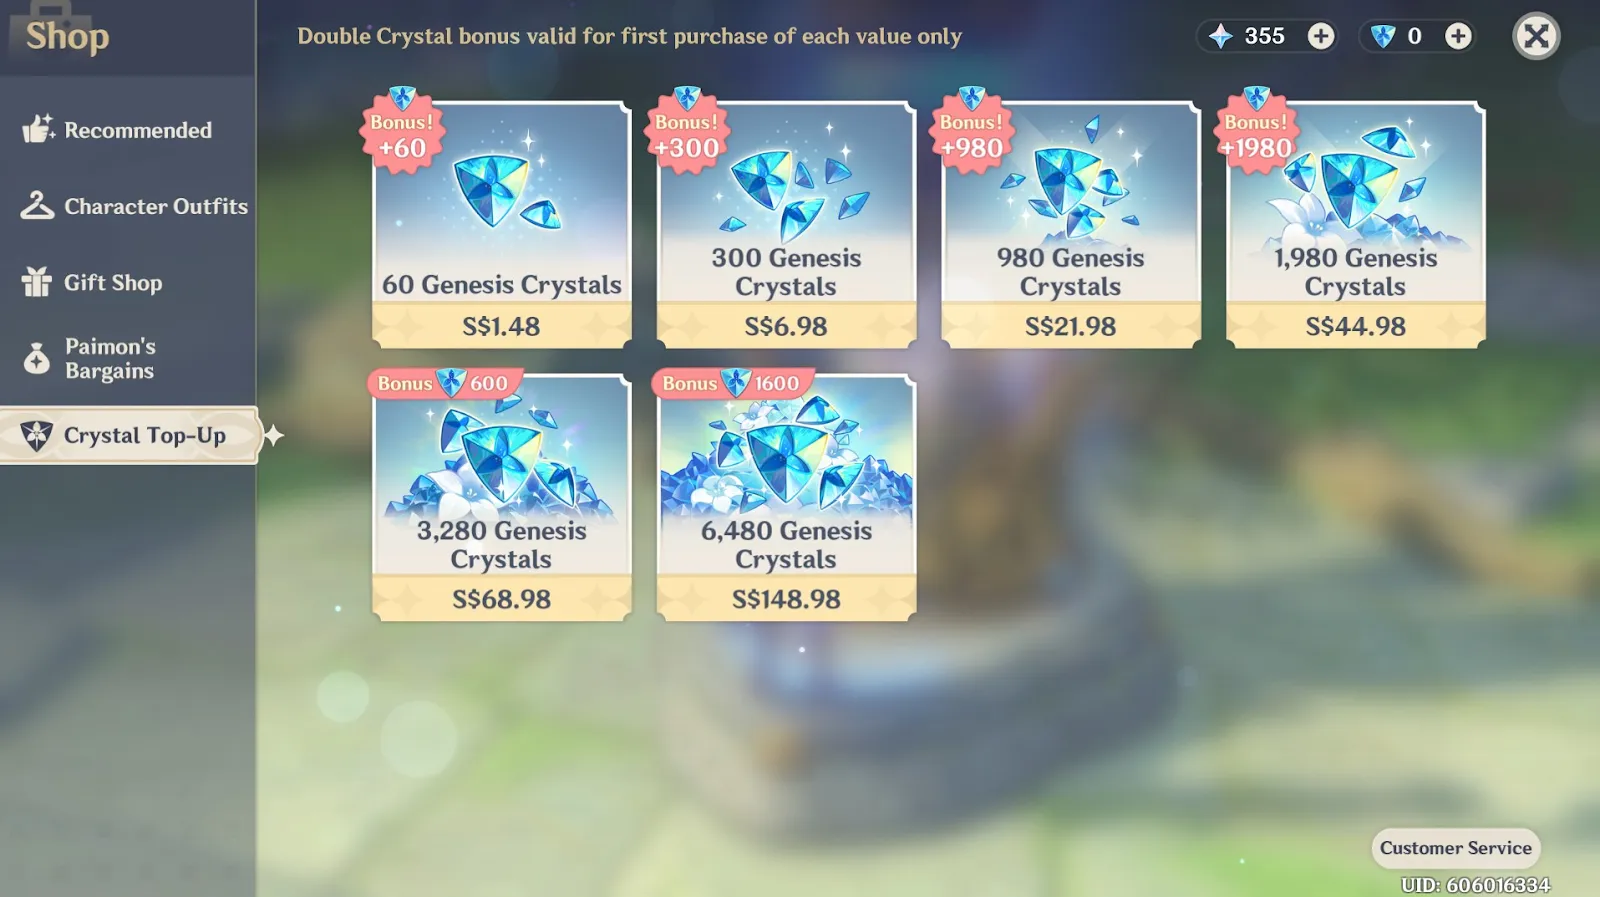 You can also get Genesis Crystals on third party websites.